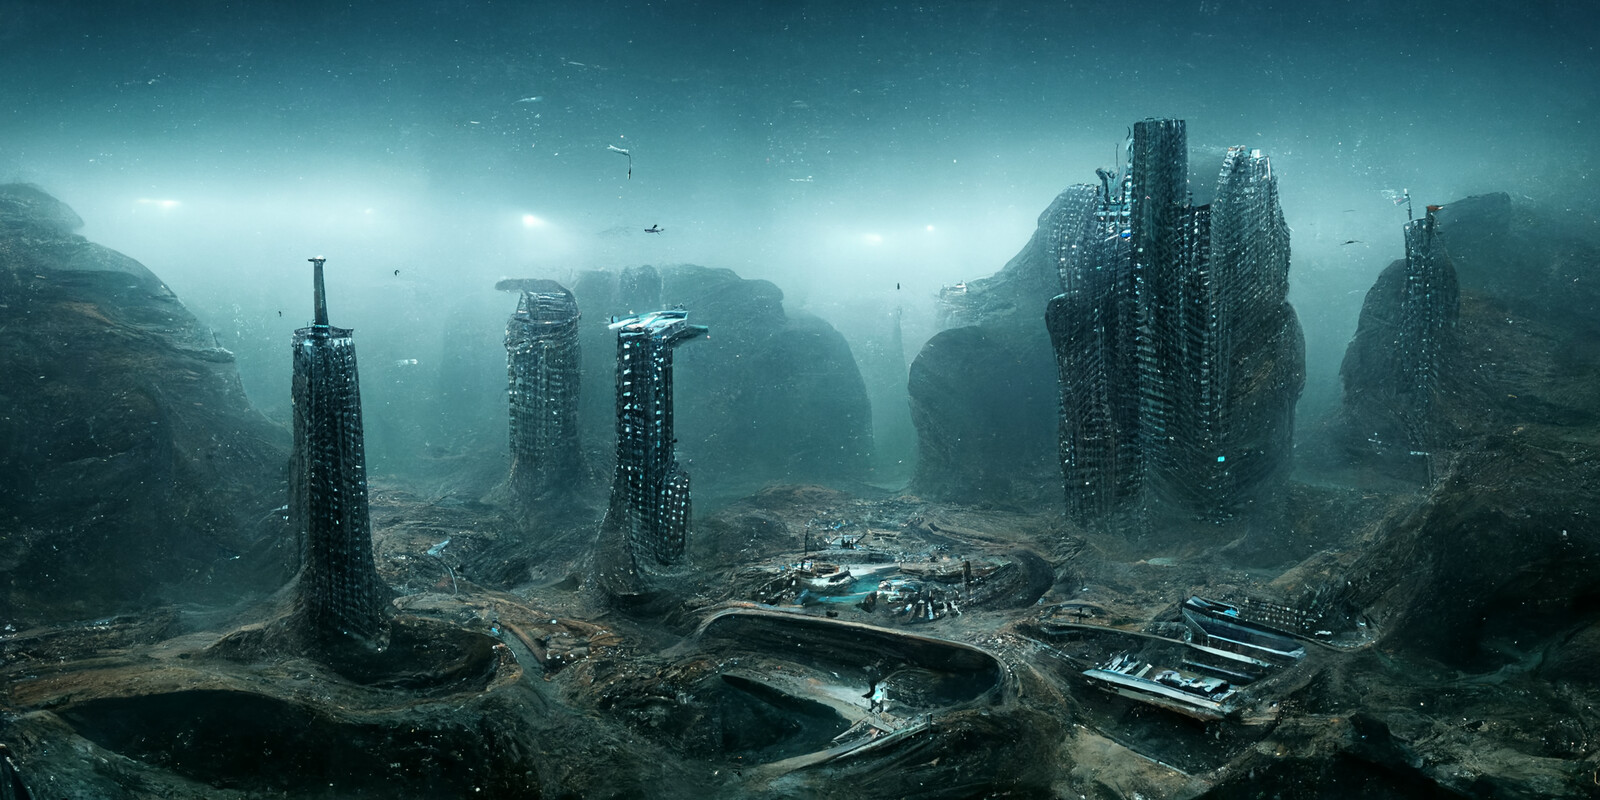 Ocean floor mining facility "Novskorad", 4km from the Dark Reef, was completely abandoned. No trace of the 35 human workers. 